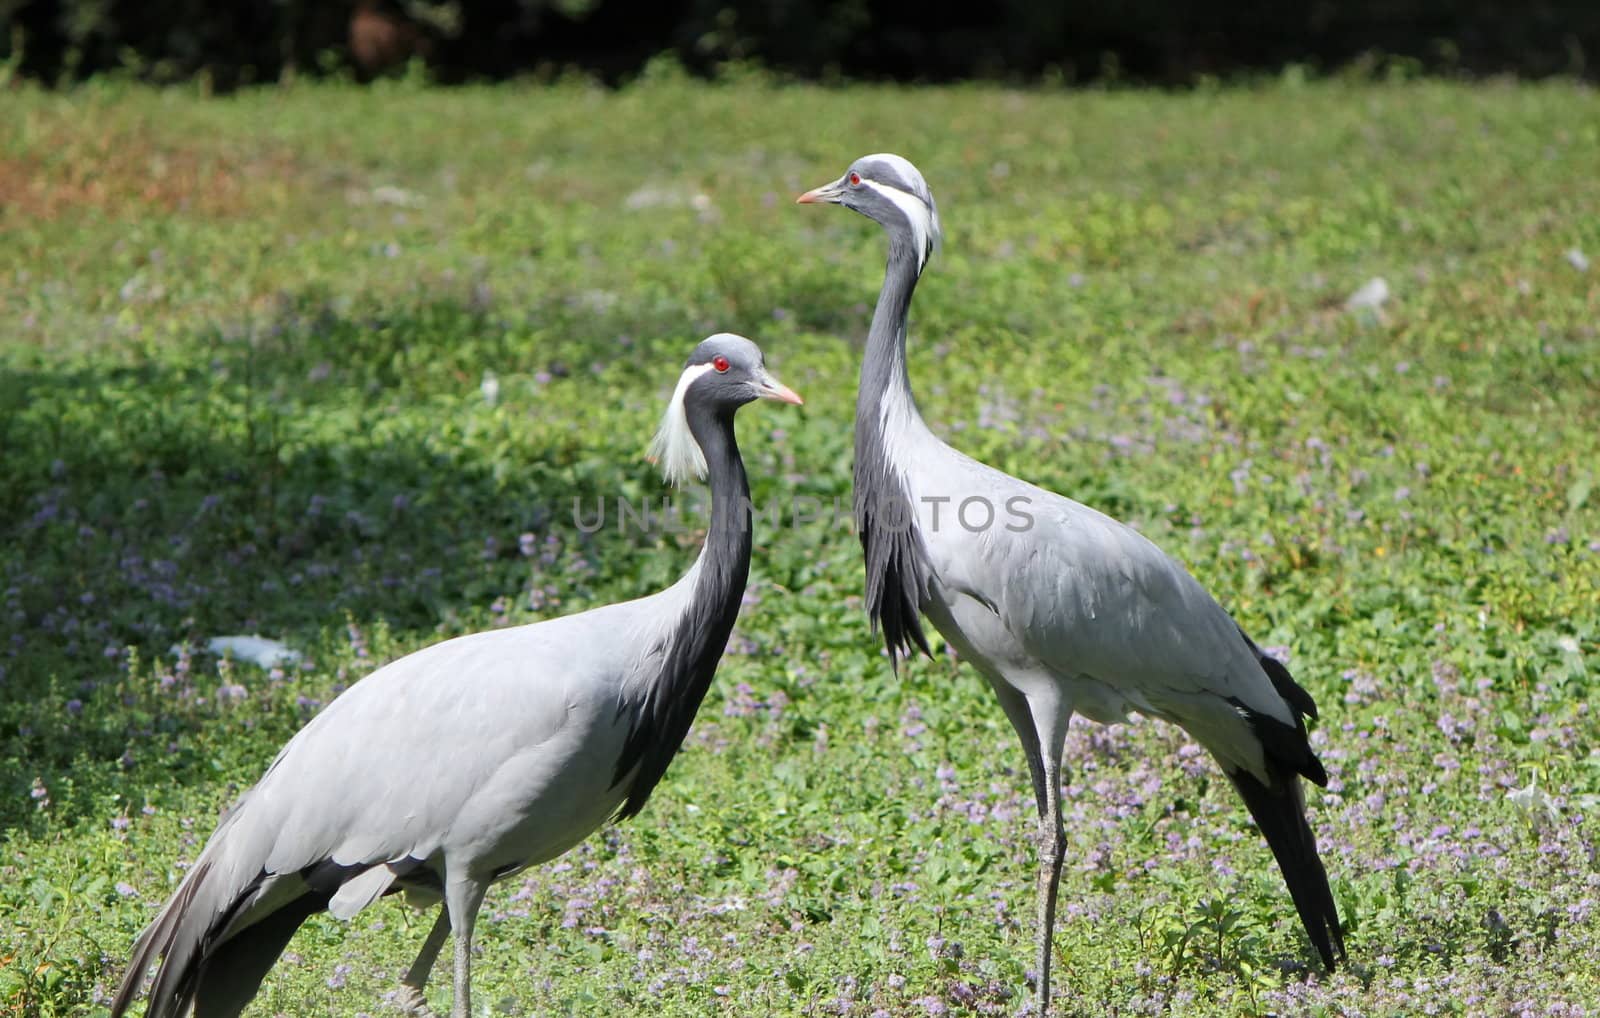 Two beautiful grey ash cranes with their red eyes standing in the green grass